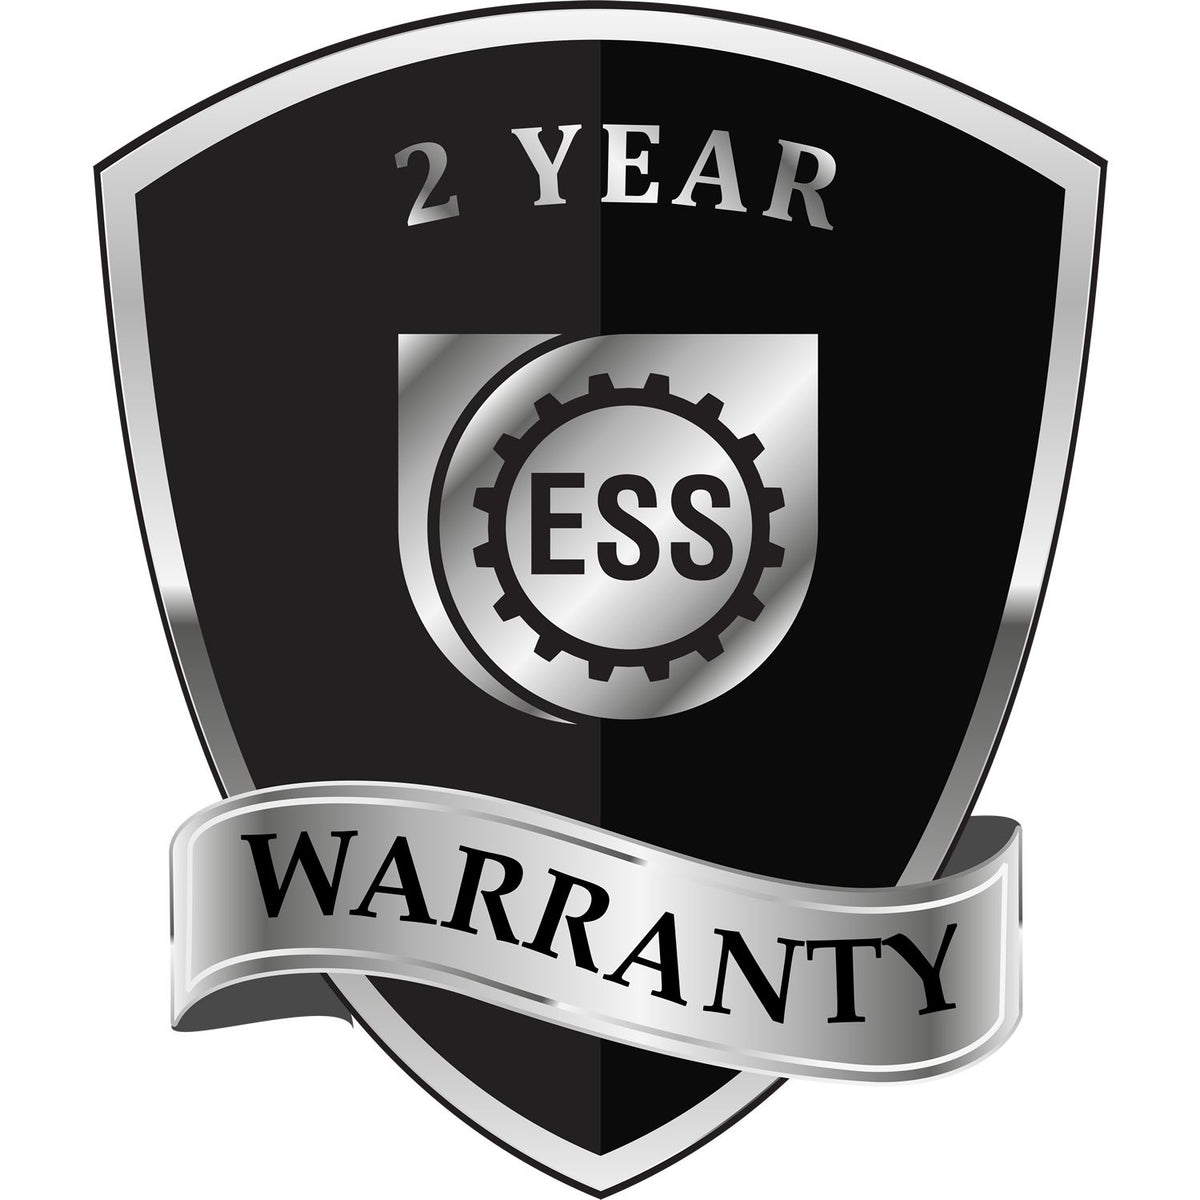 A badge or emblem showing a warranty icon for the Heavy Duty Cast Iron Montana Land Surveyor Seal Embosser